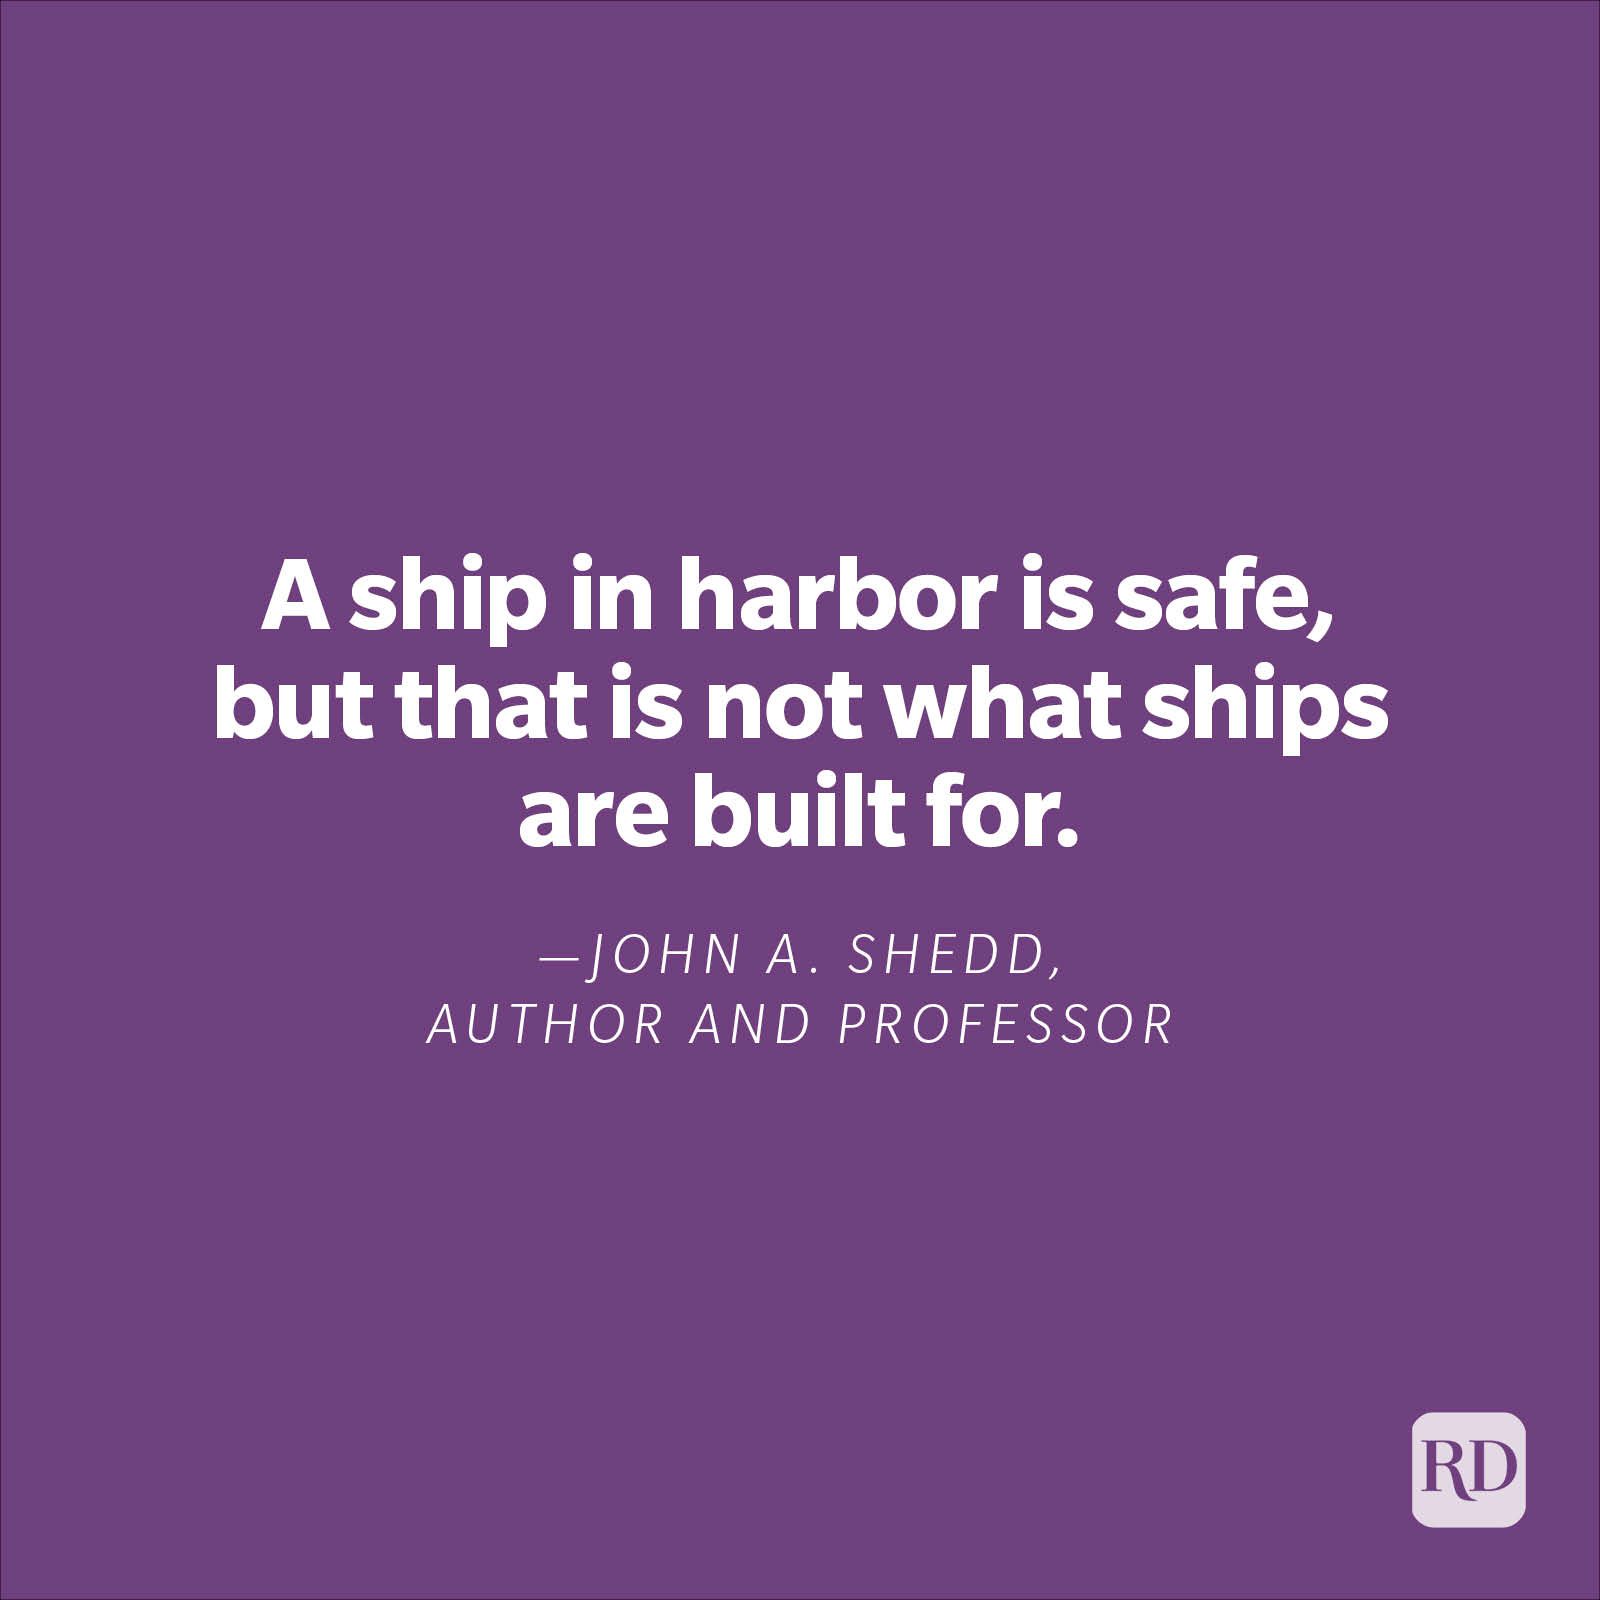 "A ship in harbor is safe, but that is not what ships are built for."—John A. Shedd, author, and professor. 